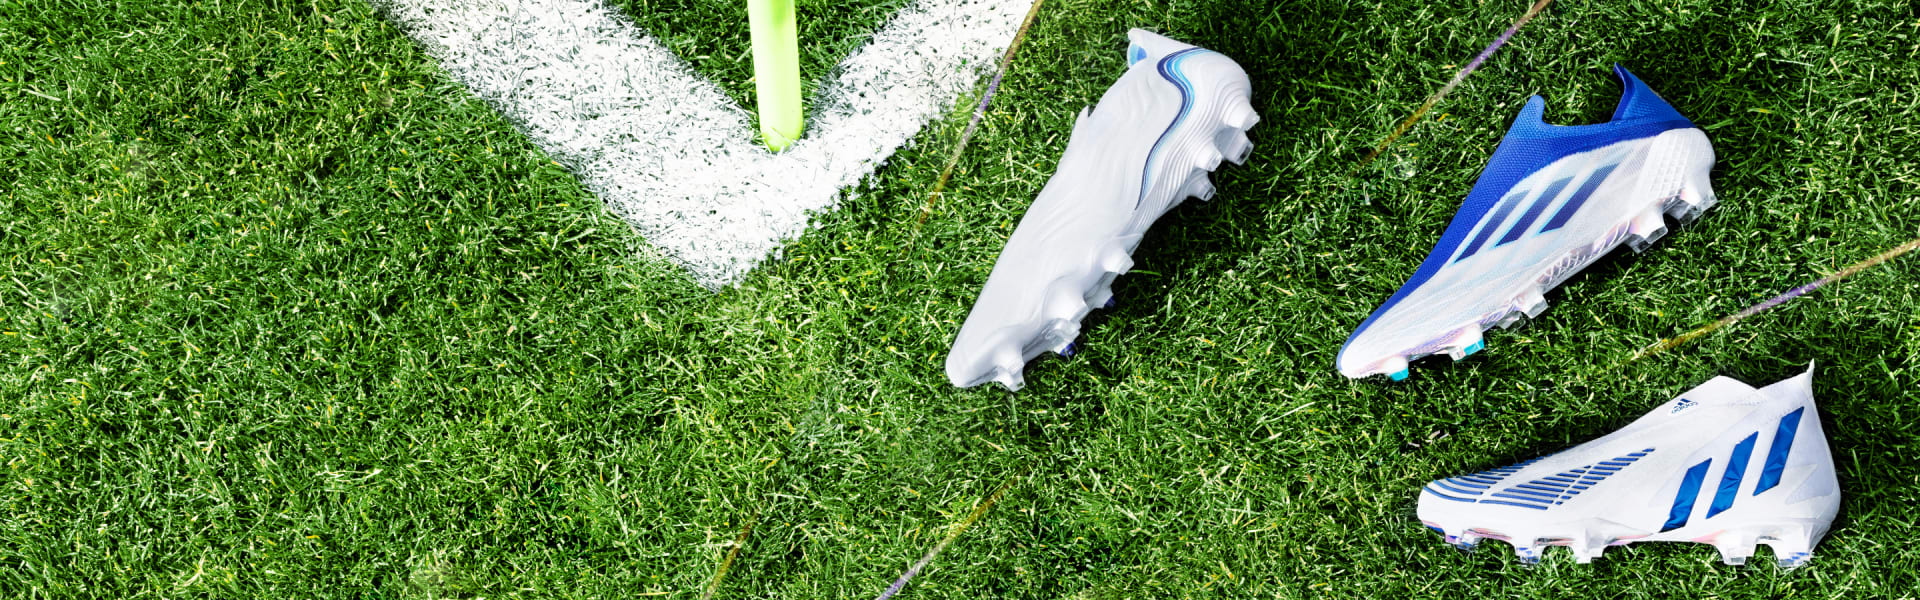 Image of the COPA, X and Predator on grass (corner of the pitch).